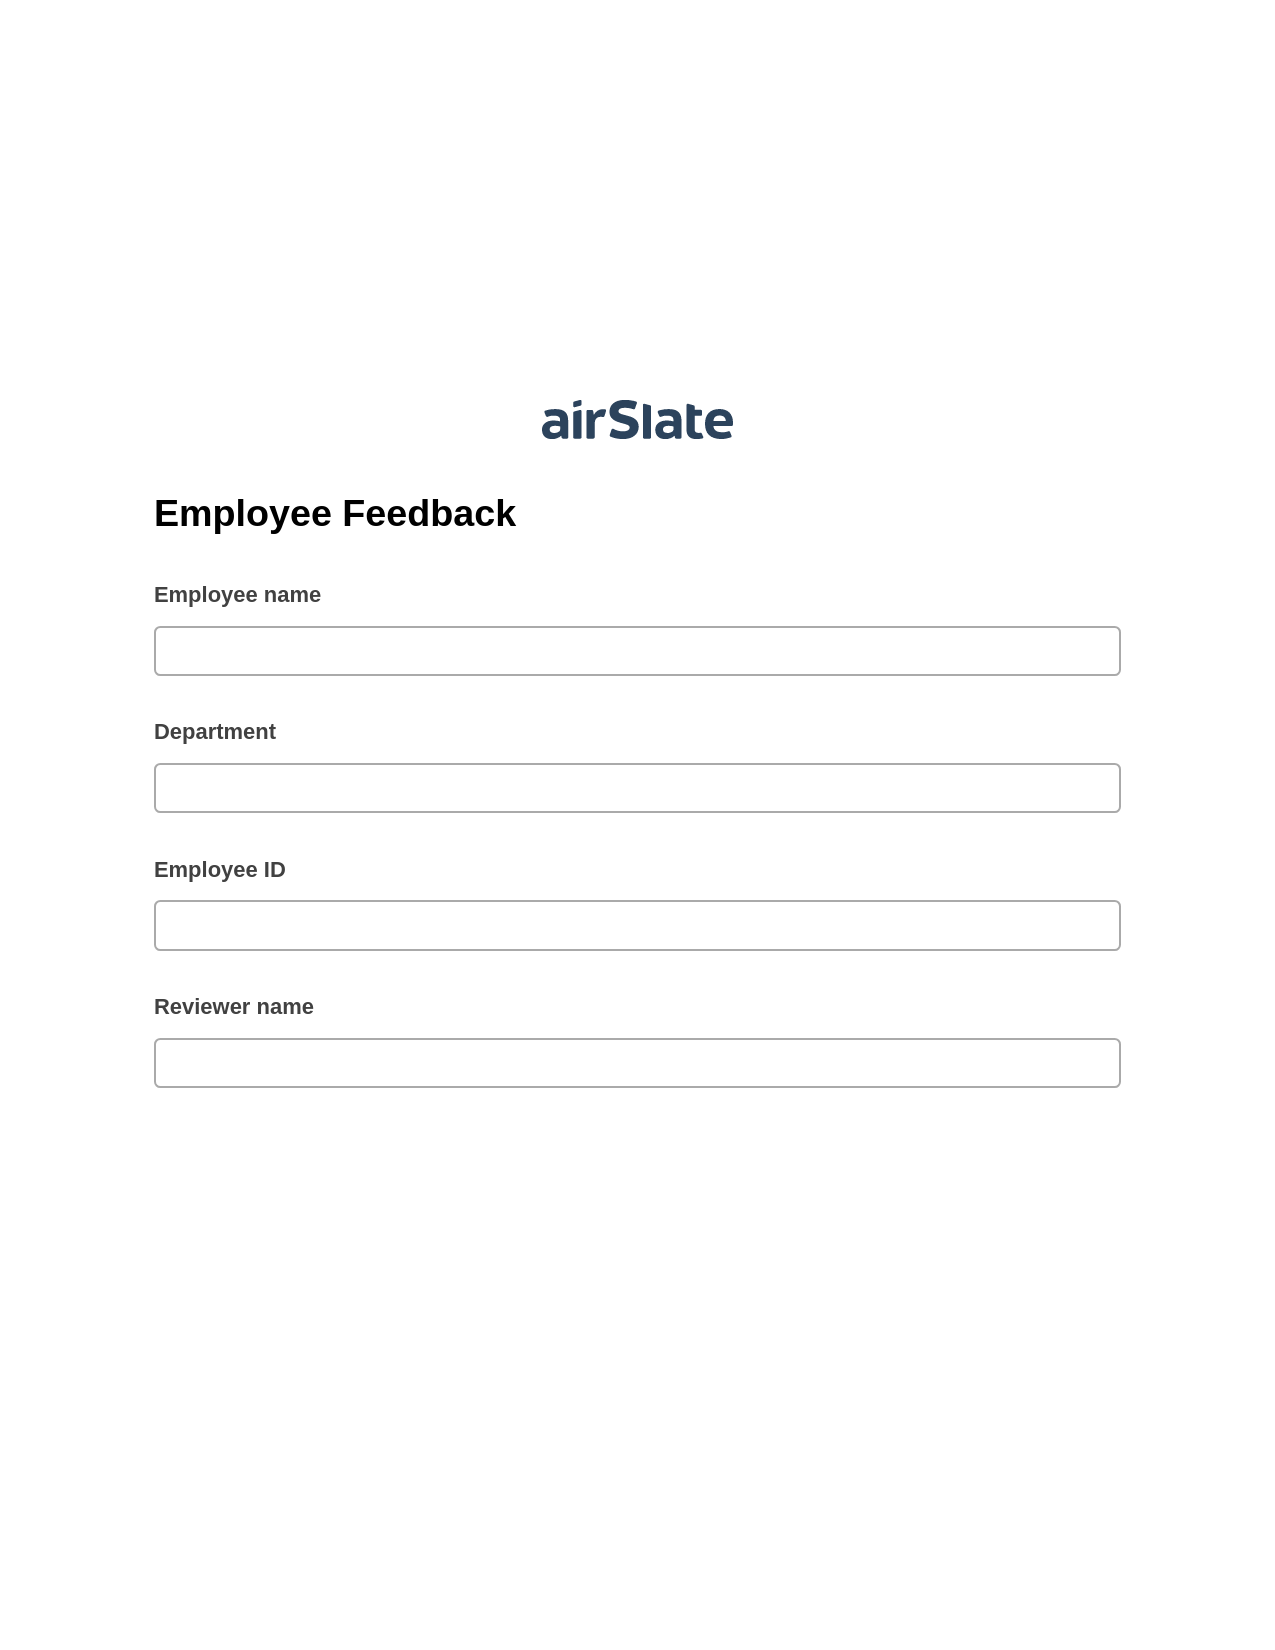 Employee Feedback Pre-fill from CSV File Bot, In-person Signing Bot, Google Drive Bot